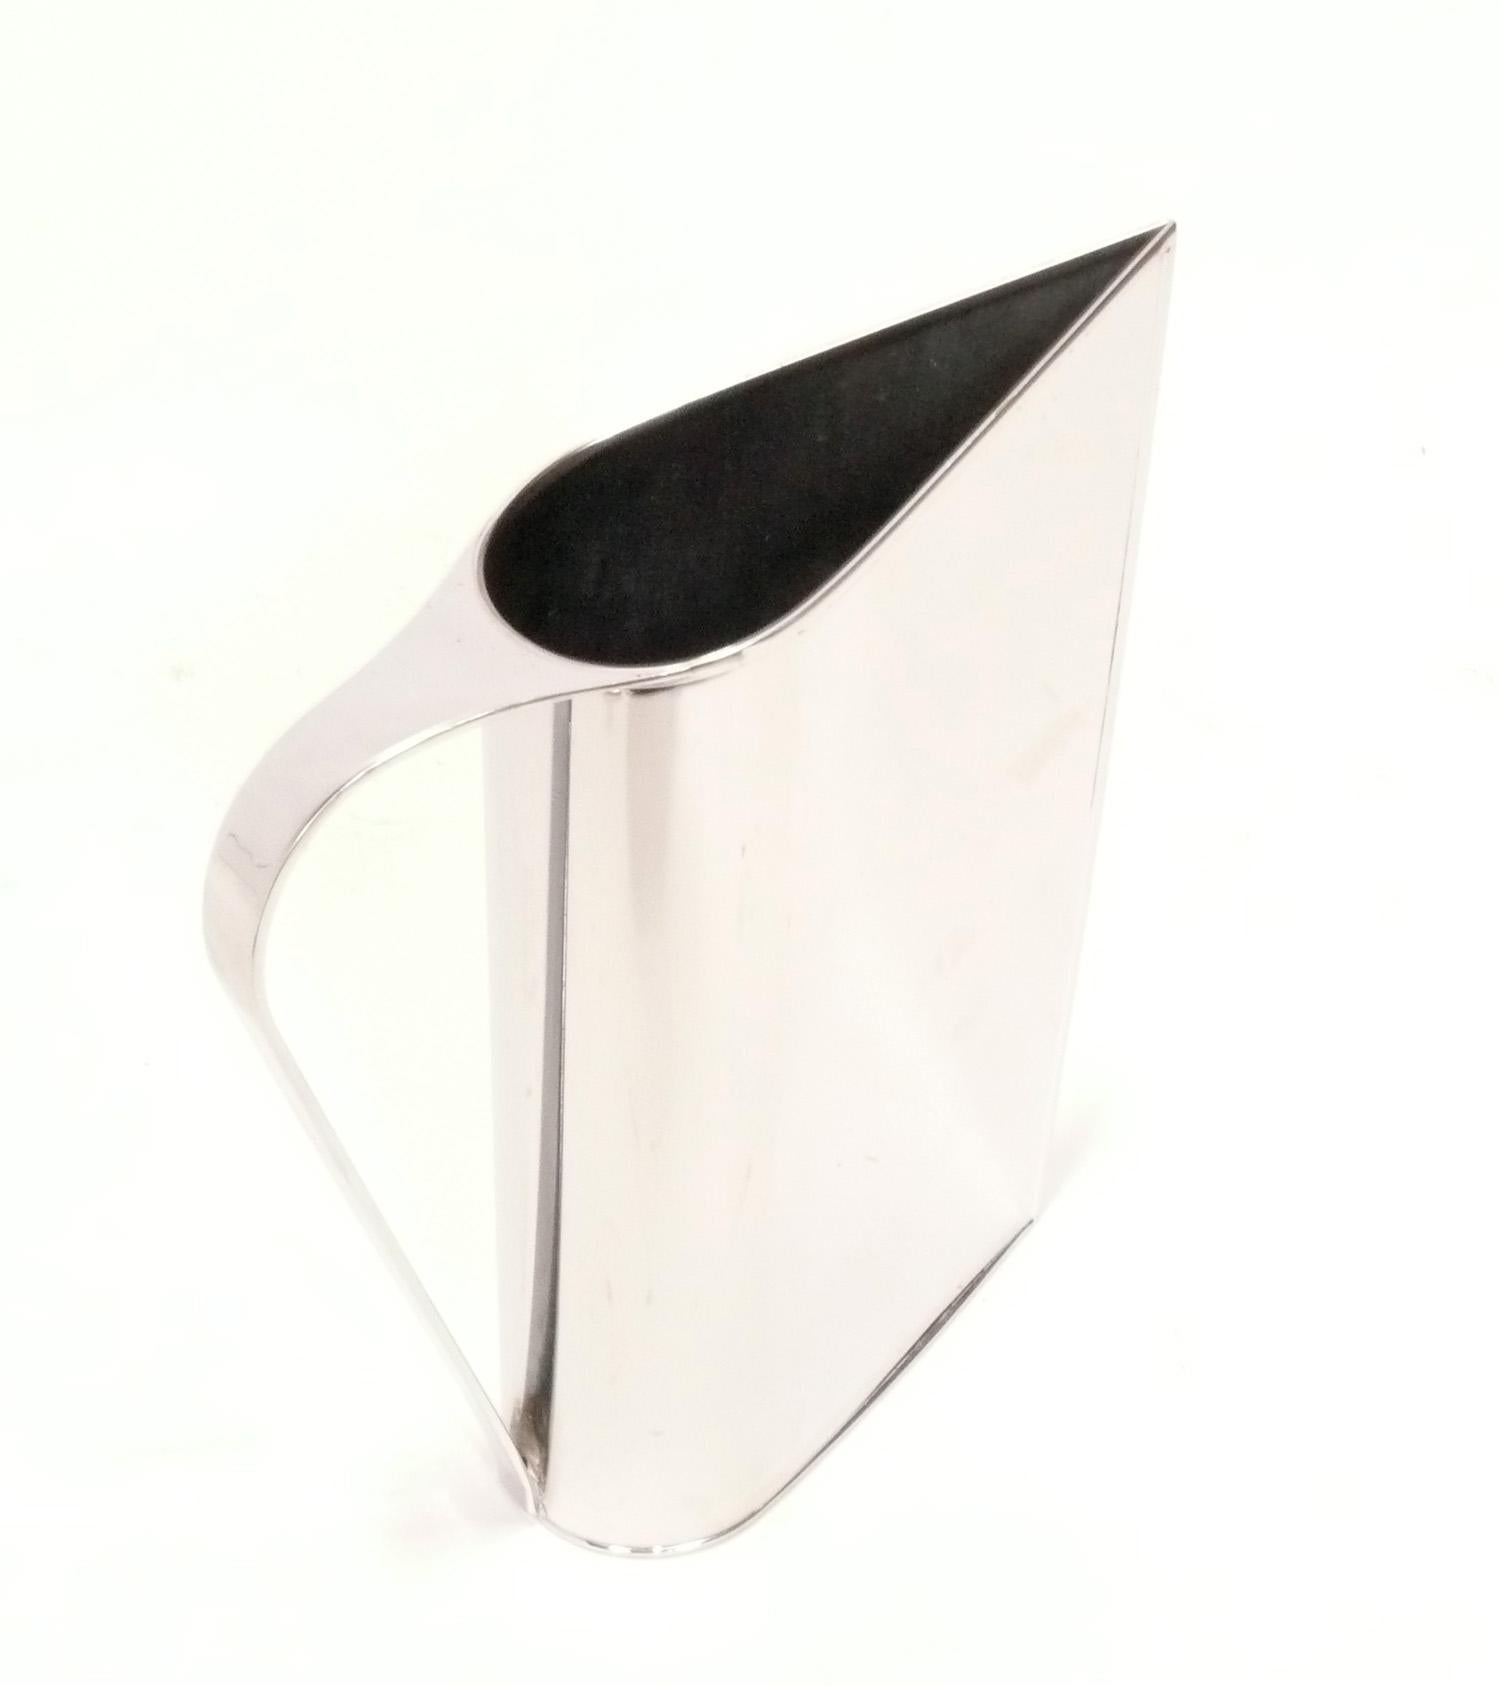 Plated Peter Muller Munk Art Deco Normandie Pitcher for Revere circa 1930s 